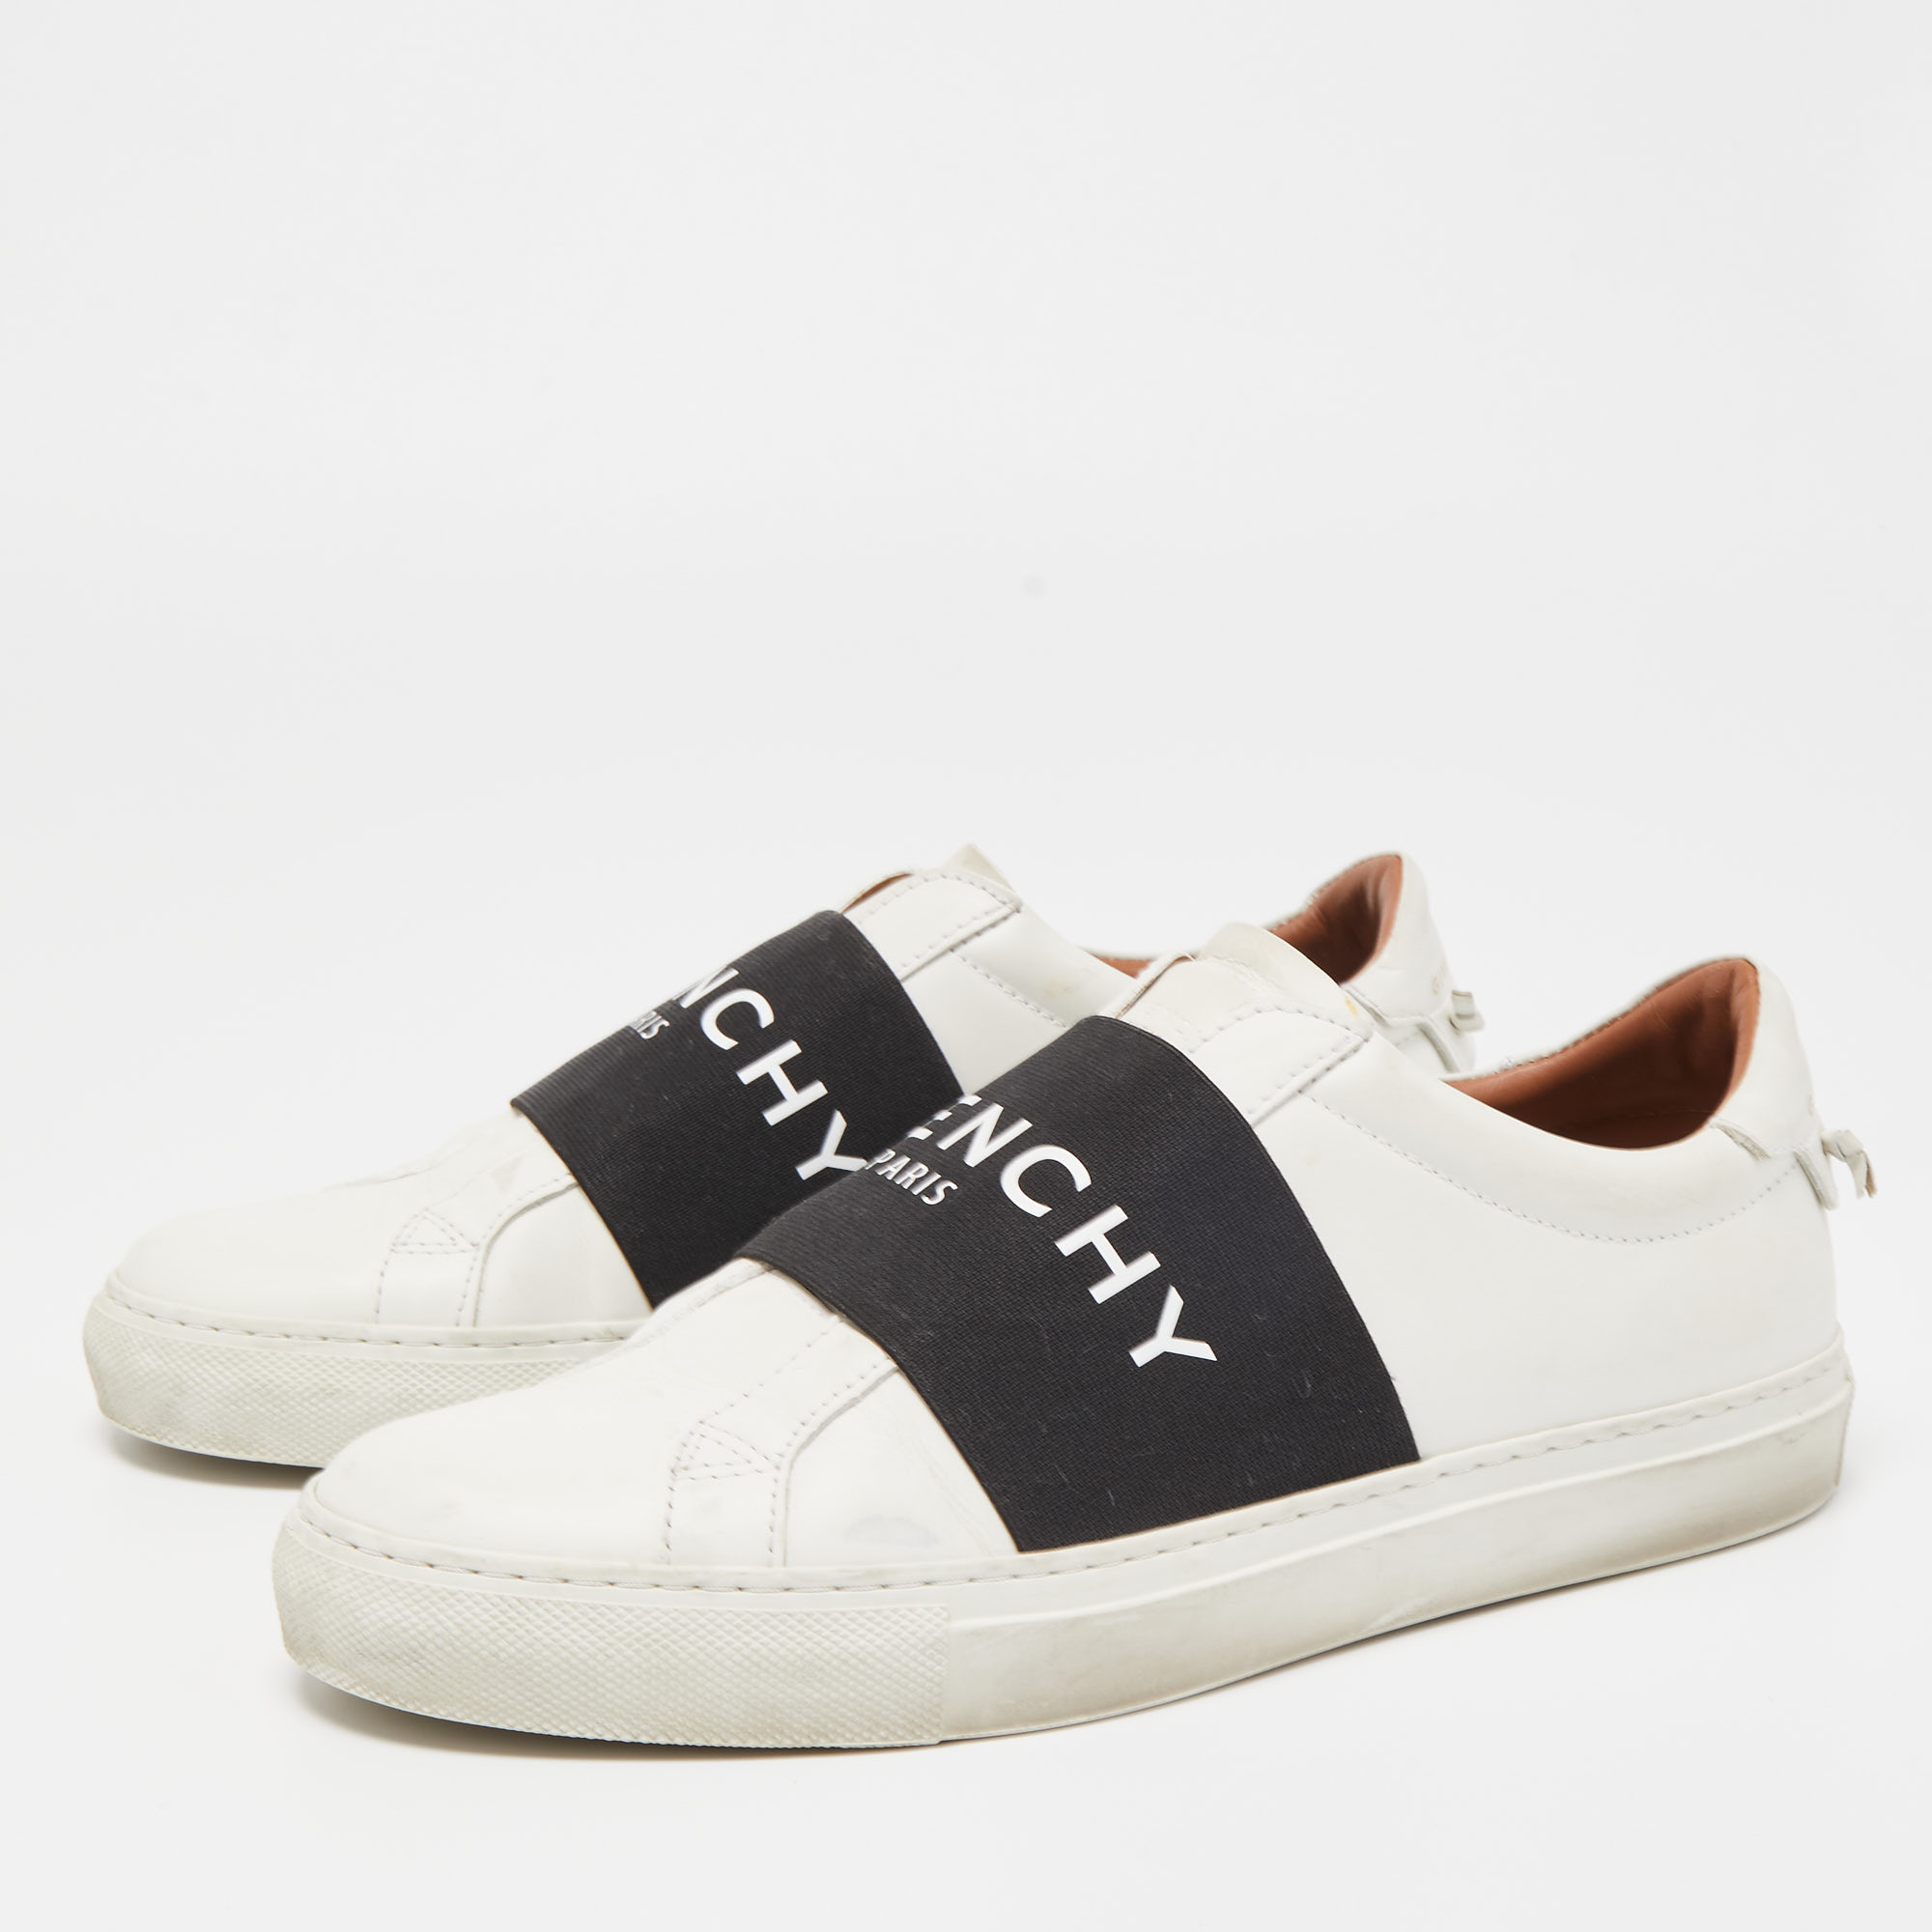 

Givenchy White/Black Leather And Elastic Band Urban Street Slip On Sneakers Size